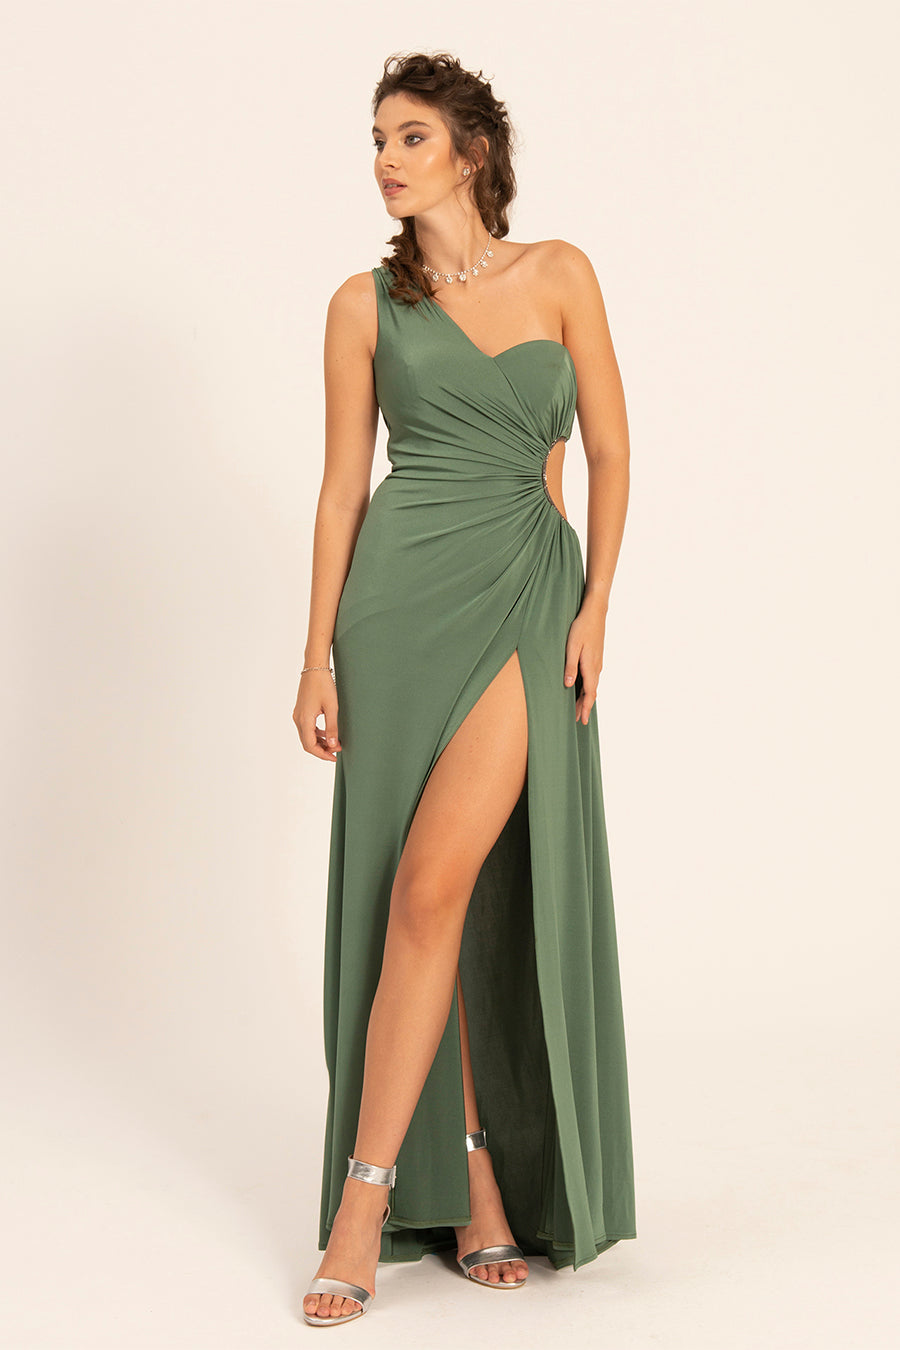 Gina - Mystic Evenings | Evening and Prom Dresses